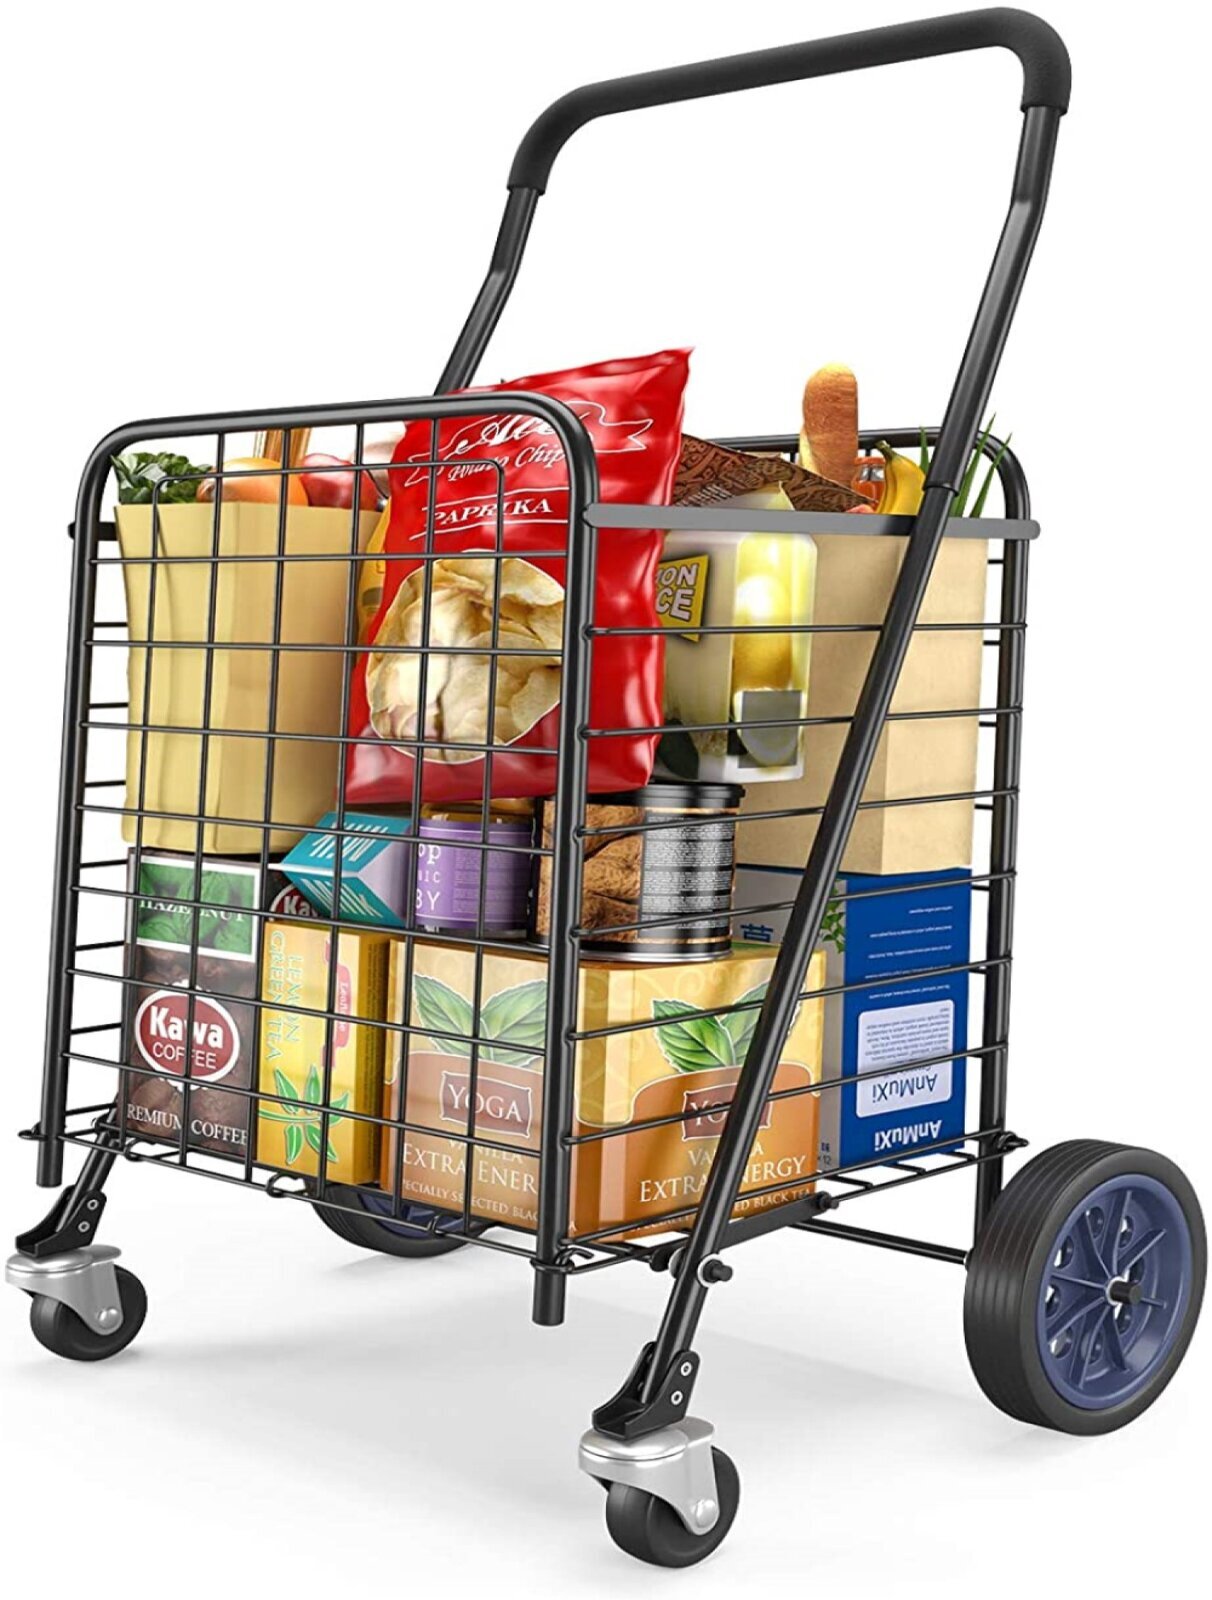 Lightweight Carries Up To 66 lb Grocery Bag On Wheels Large, Gold Shopping Trolley HULKEN - Folds Flat Unbreakable Handles 